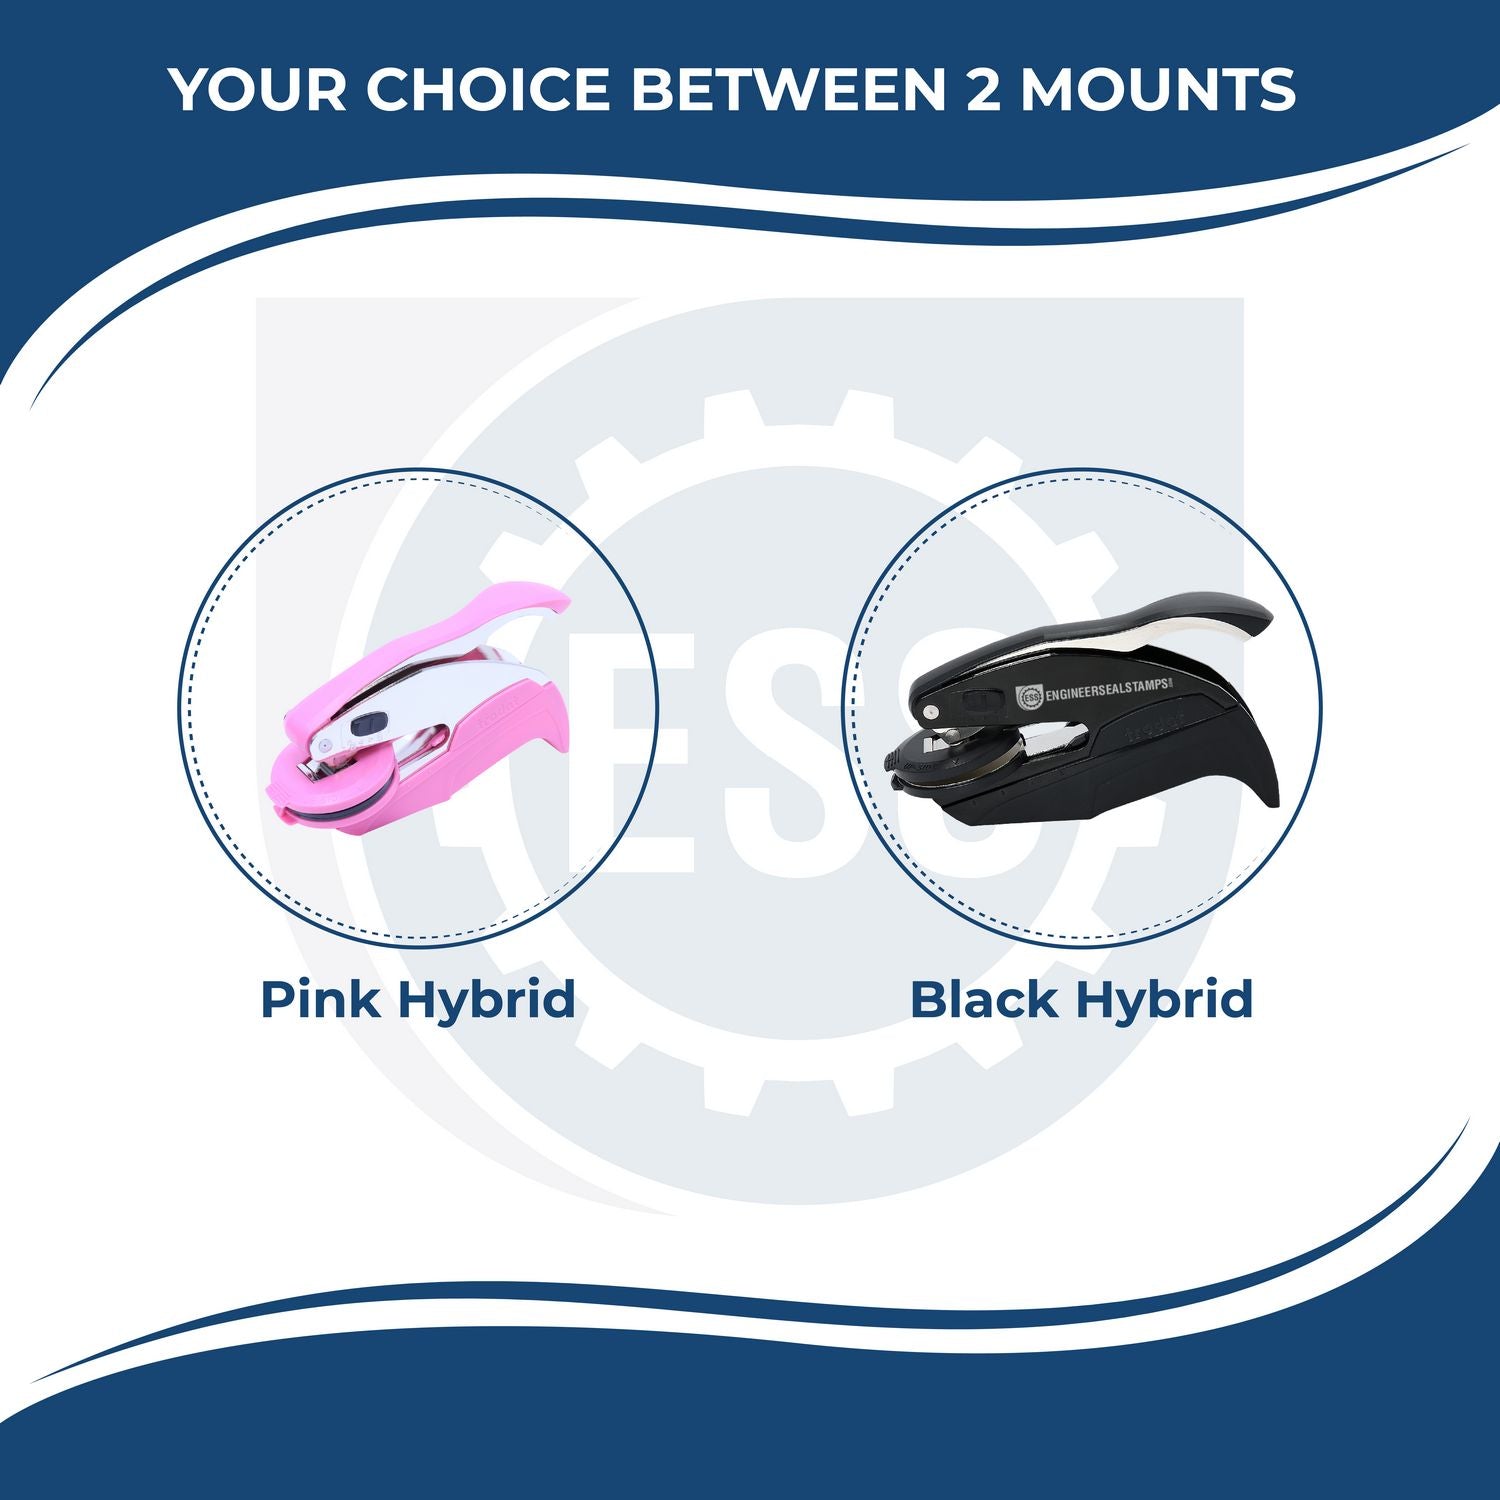 A diagram showing the handle options and colors for the gift seal embosser illustrating black, pink, gold or chrome